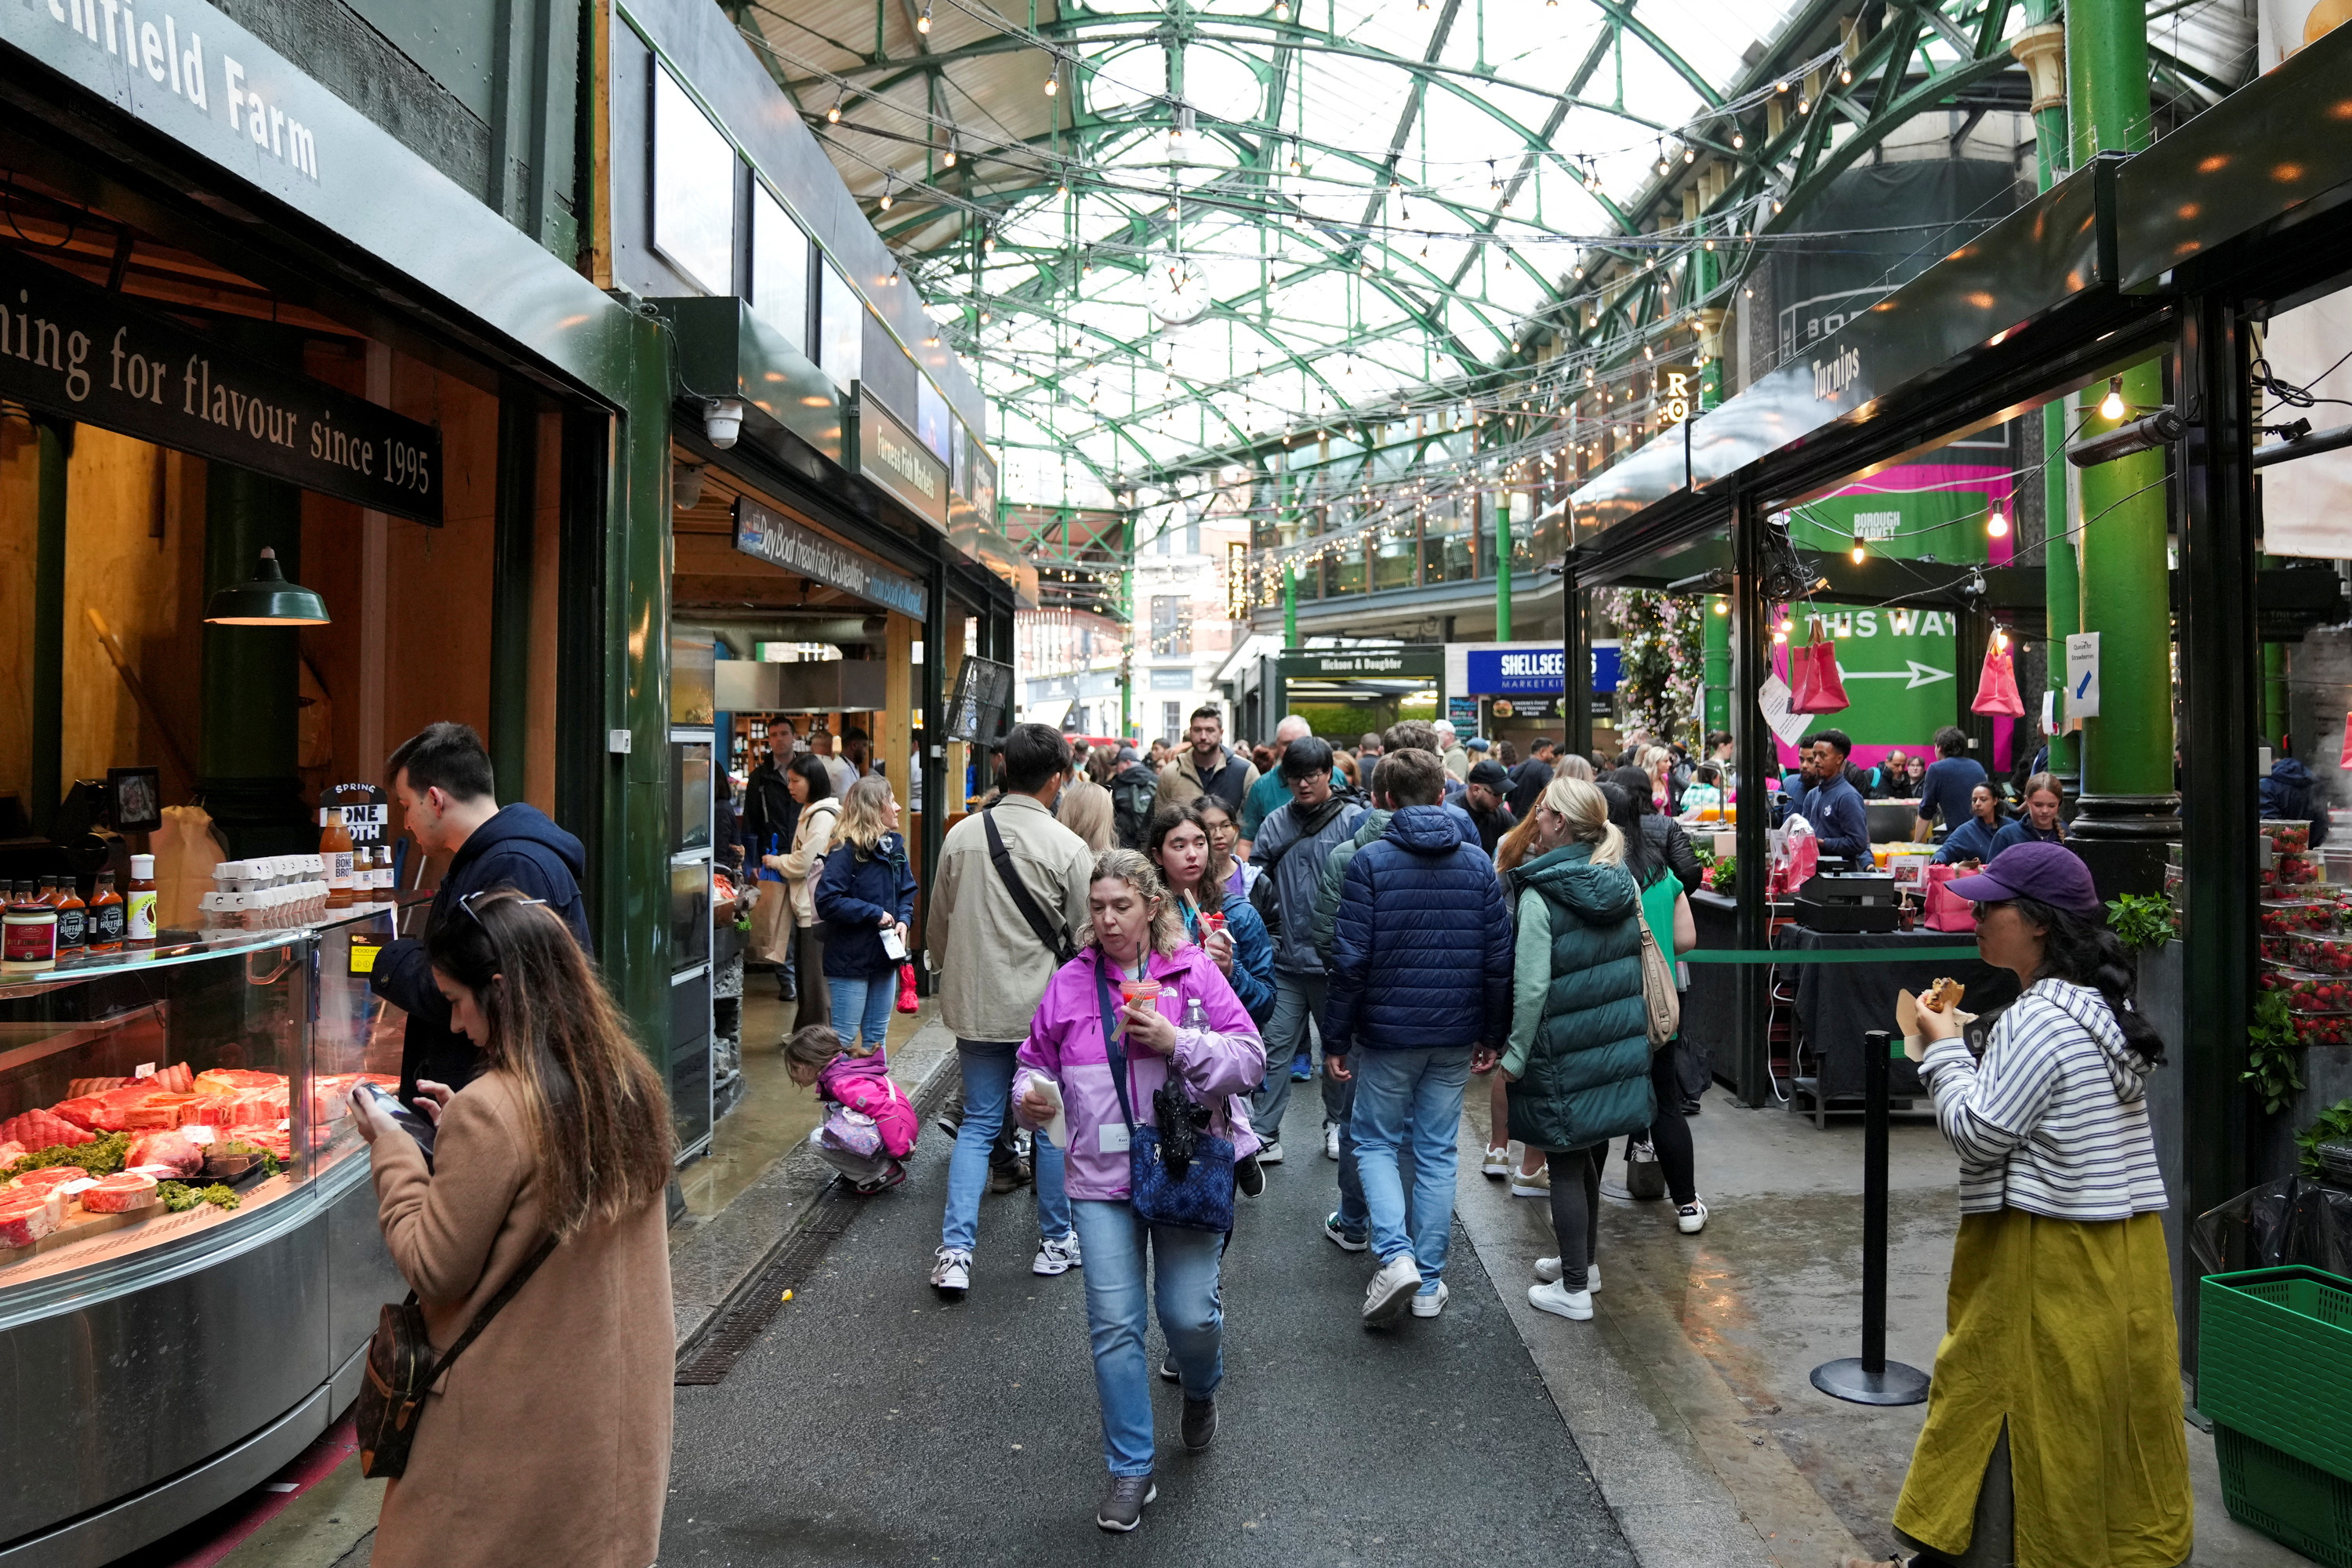 People walk past food stands and market stalls in a Borough Market in London